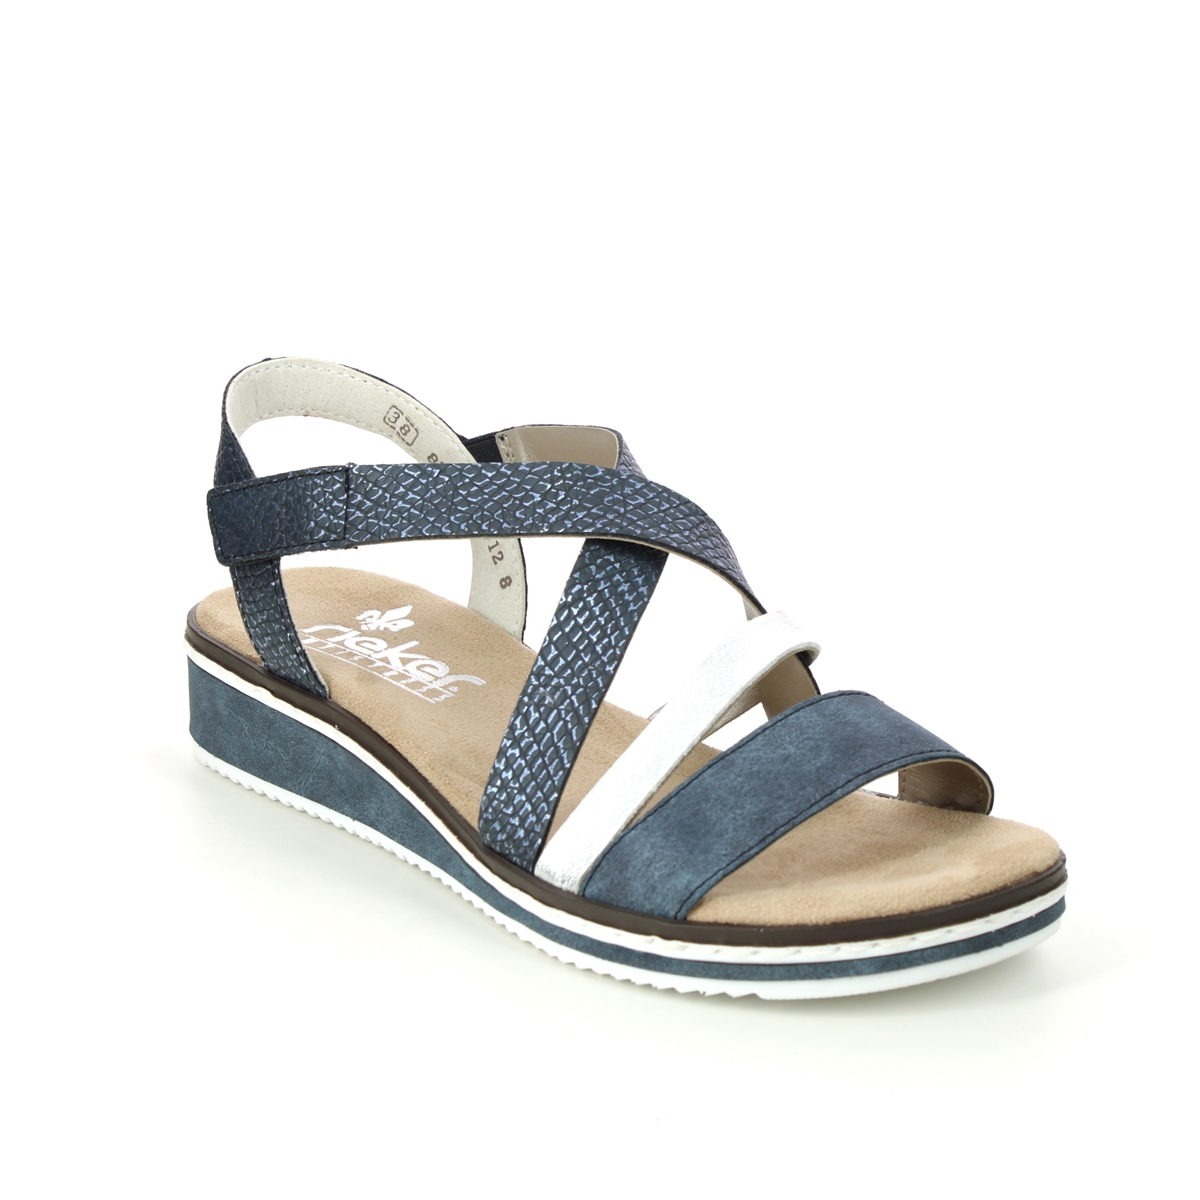 Rieker V3663-14 Navy Womens Flat Sandals in a Plain Man-made in Size 38